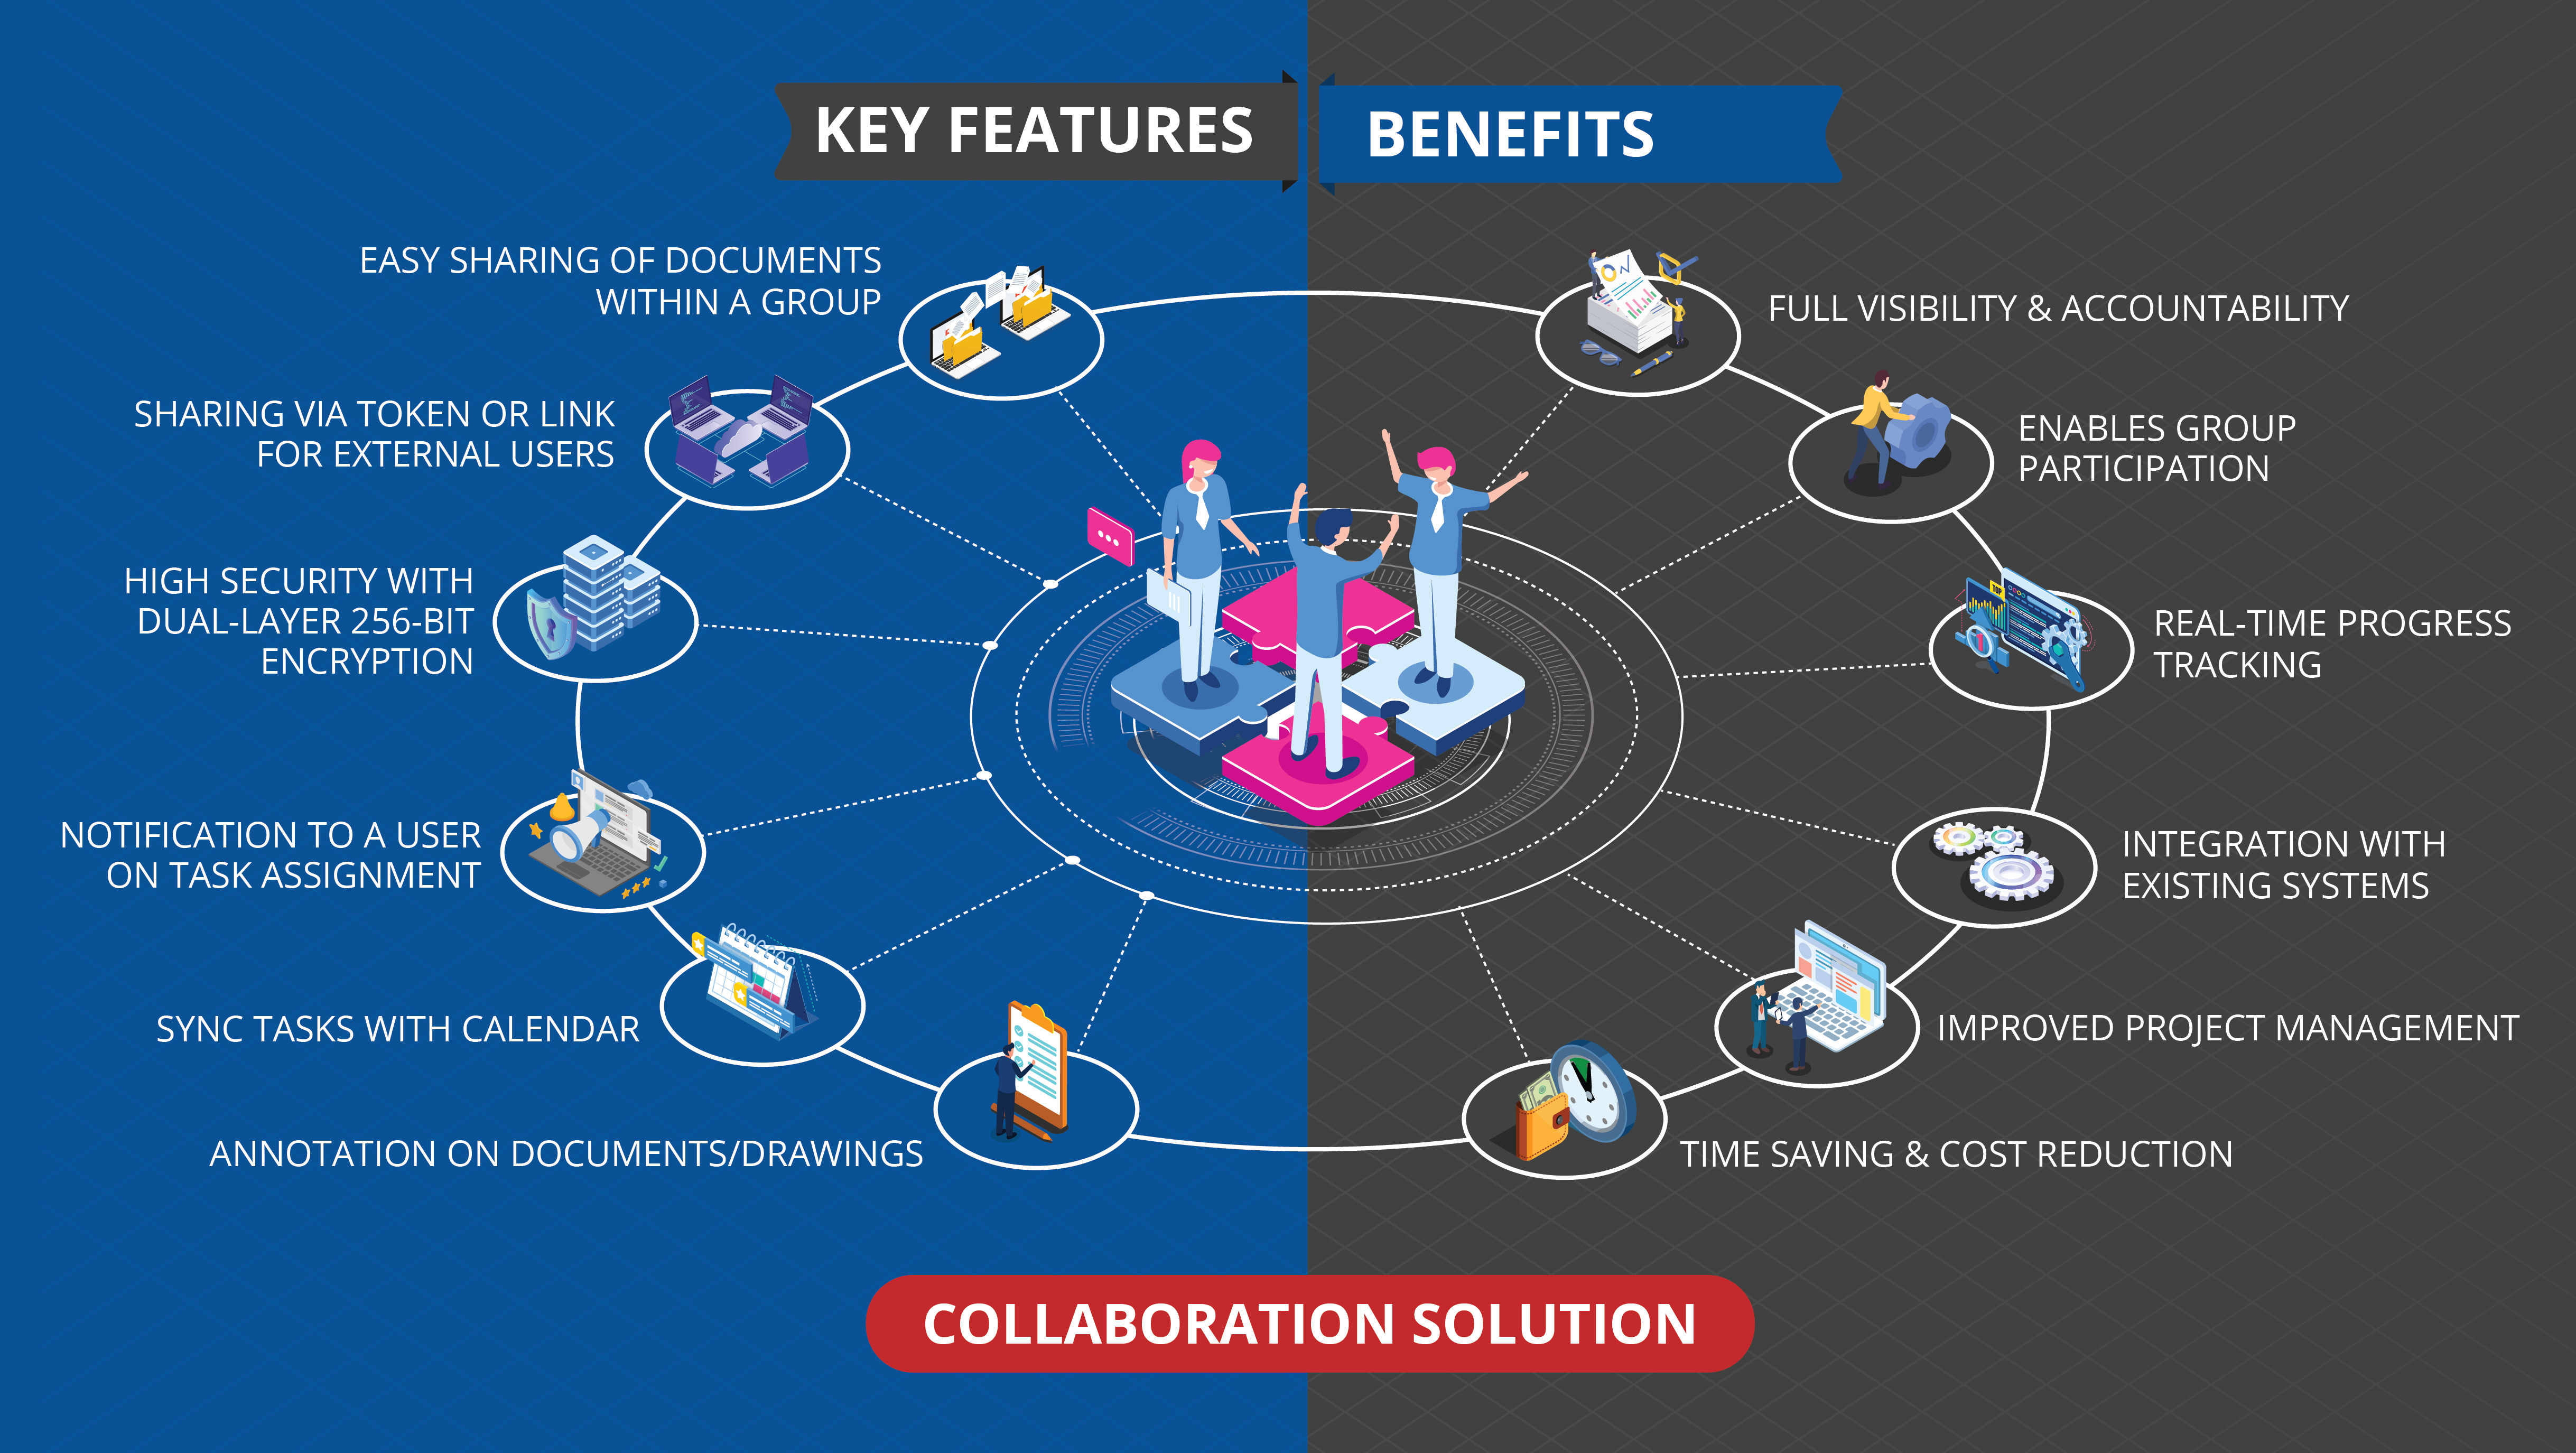 Key Features and Benefits of somnetics Collaboration Solution